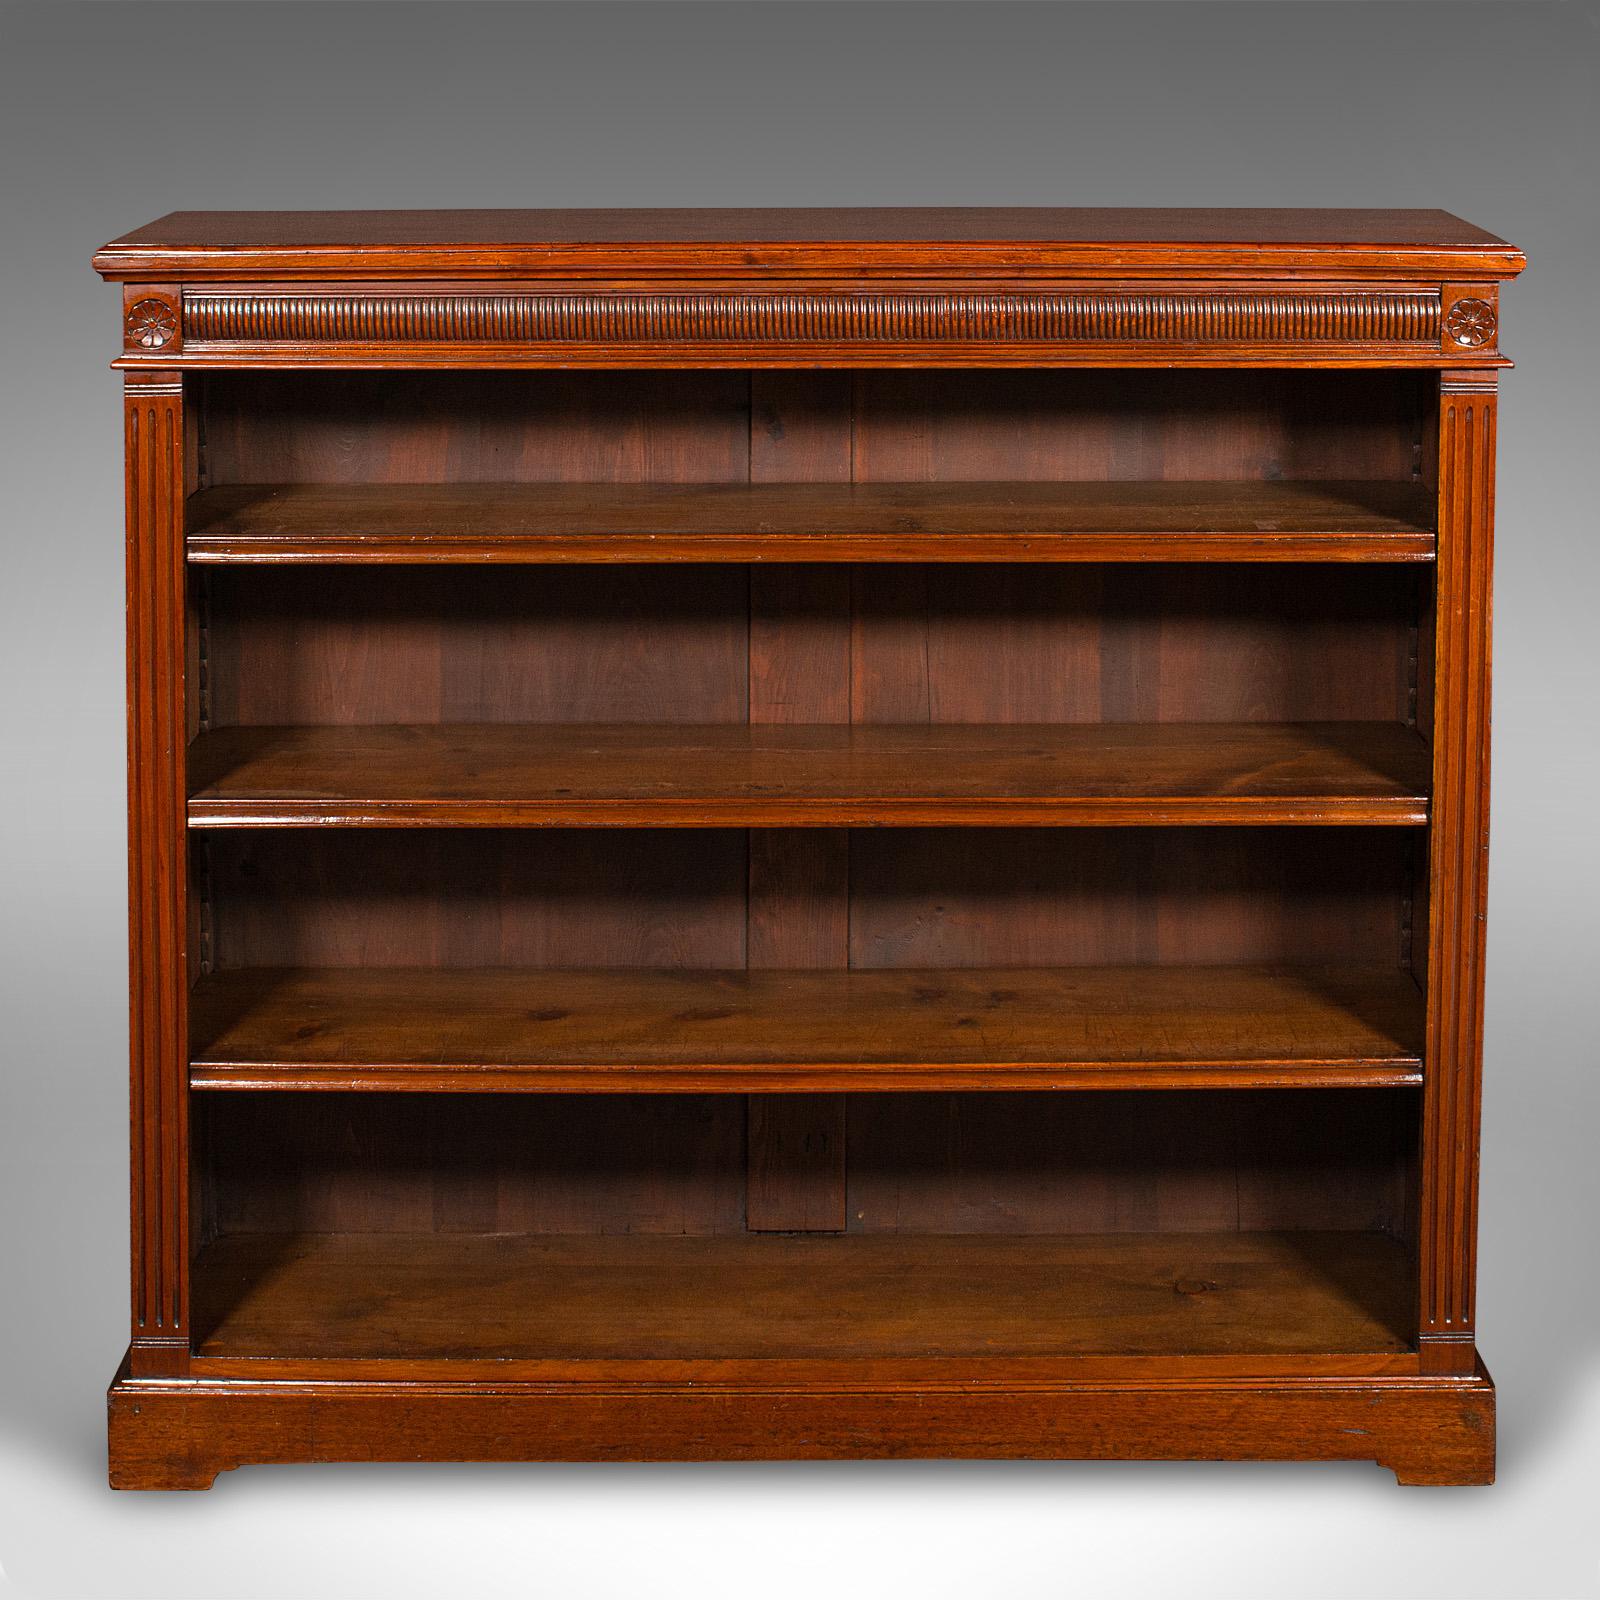 This is an antique open bookcase. An English, walnut bookshelf cabinet, dating to the late Victorian period, circa 1900.

Stout and purposeful bookcase, with a decorative flourish
Displays a desirable aged patina and in good order
Select walnut